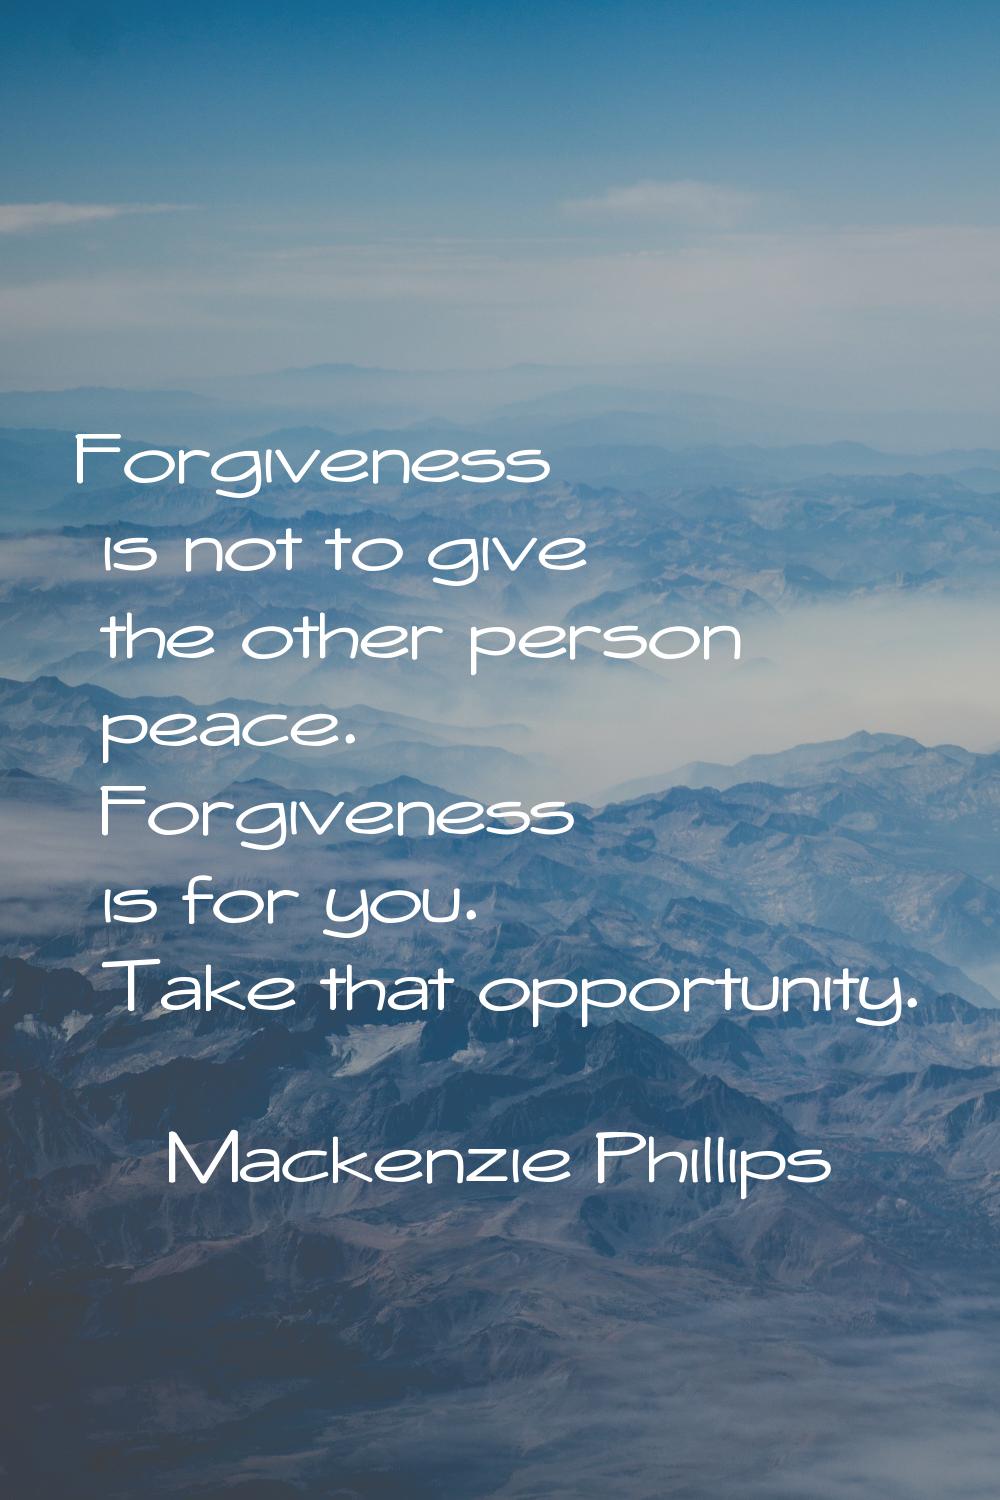 Forgiveness is not to give the other person peace. Forgiveness is for you. Take that opportunity.